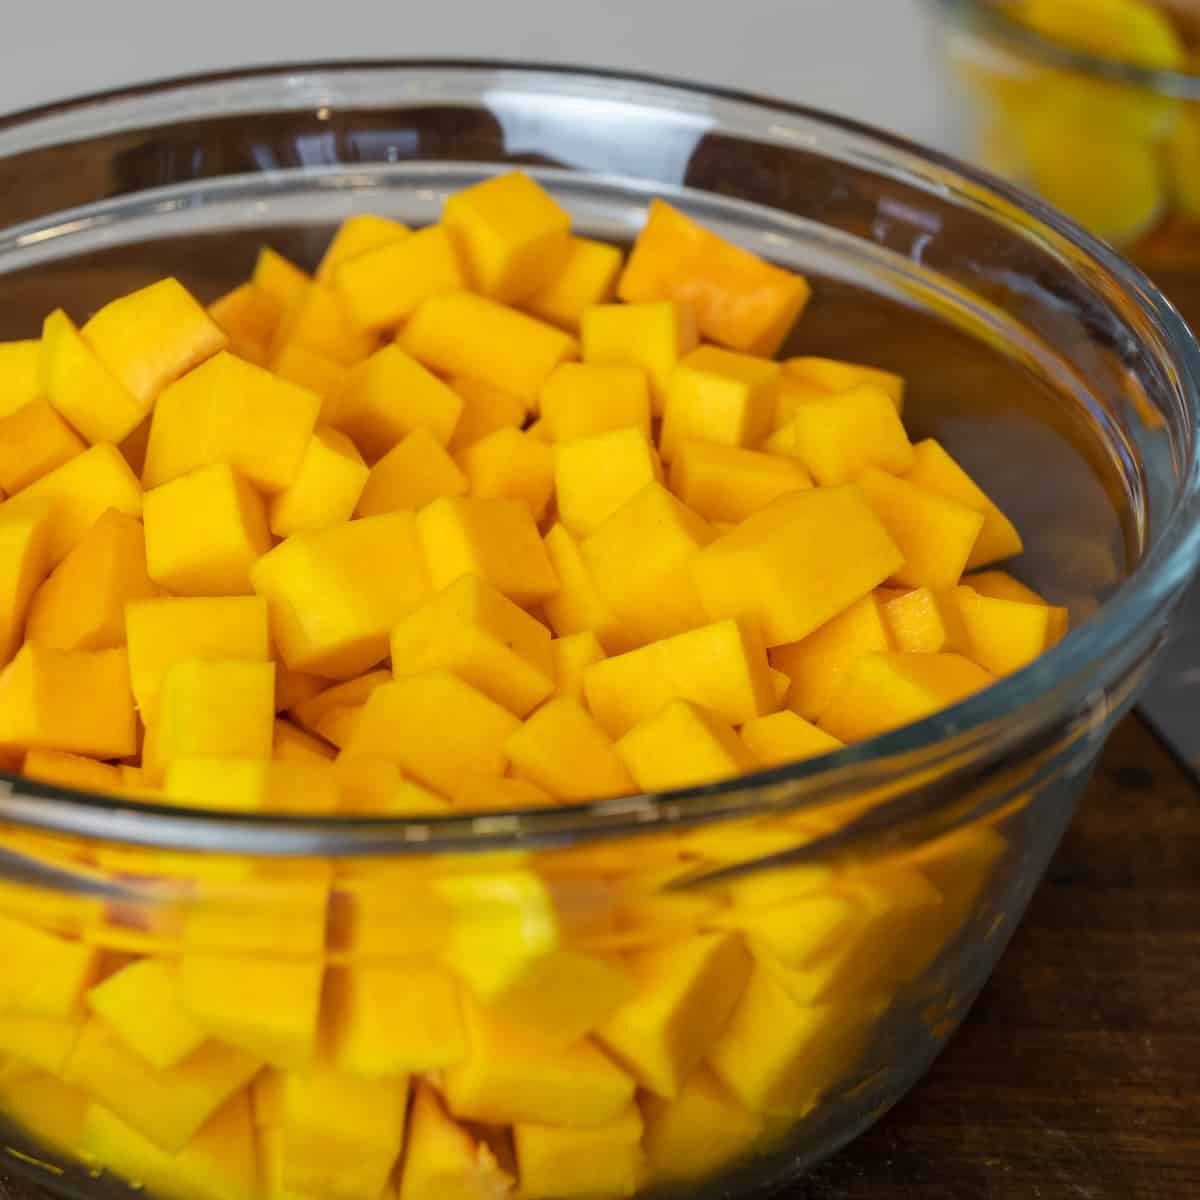 Cubes of butternut squash in a large glass bowl.